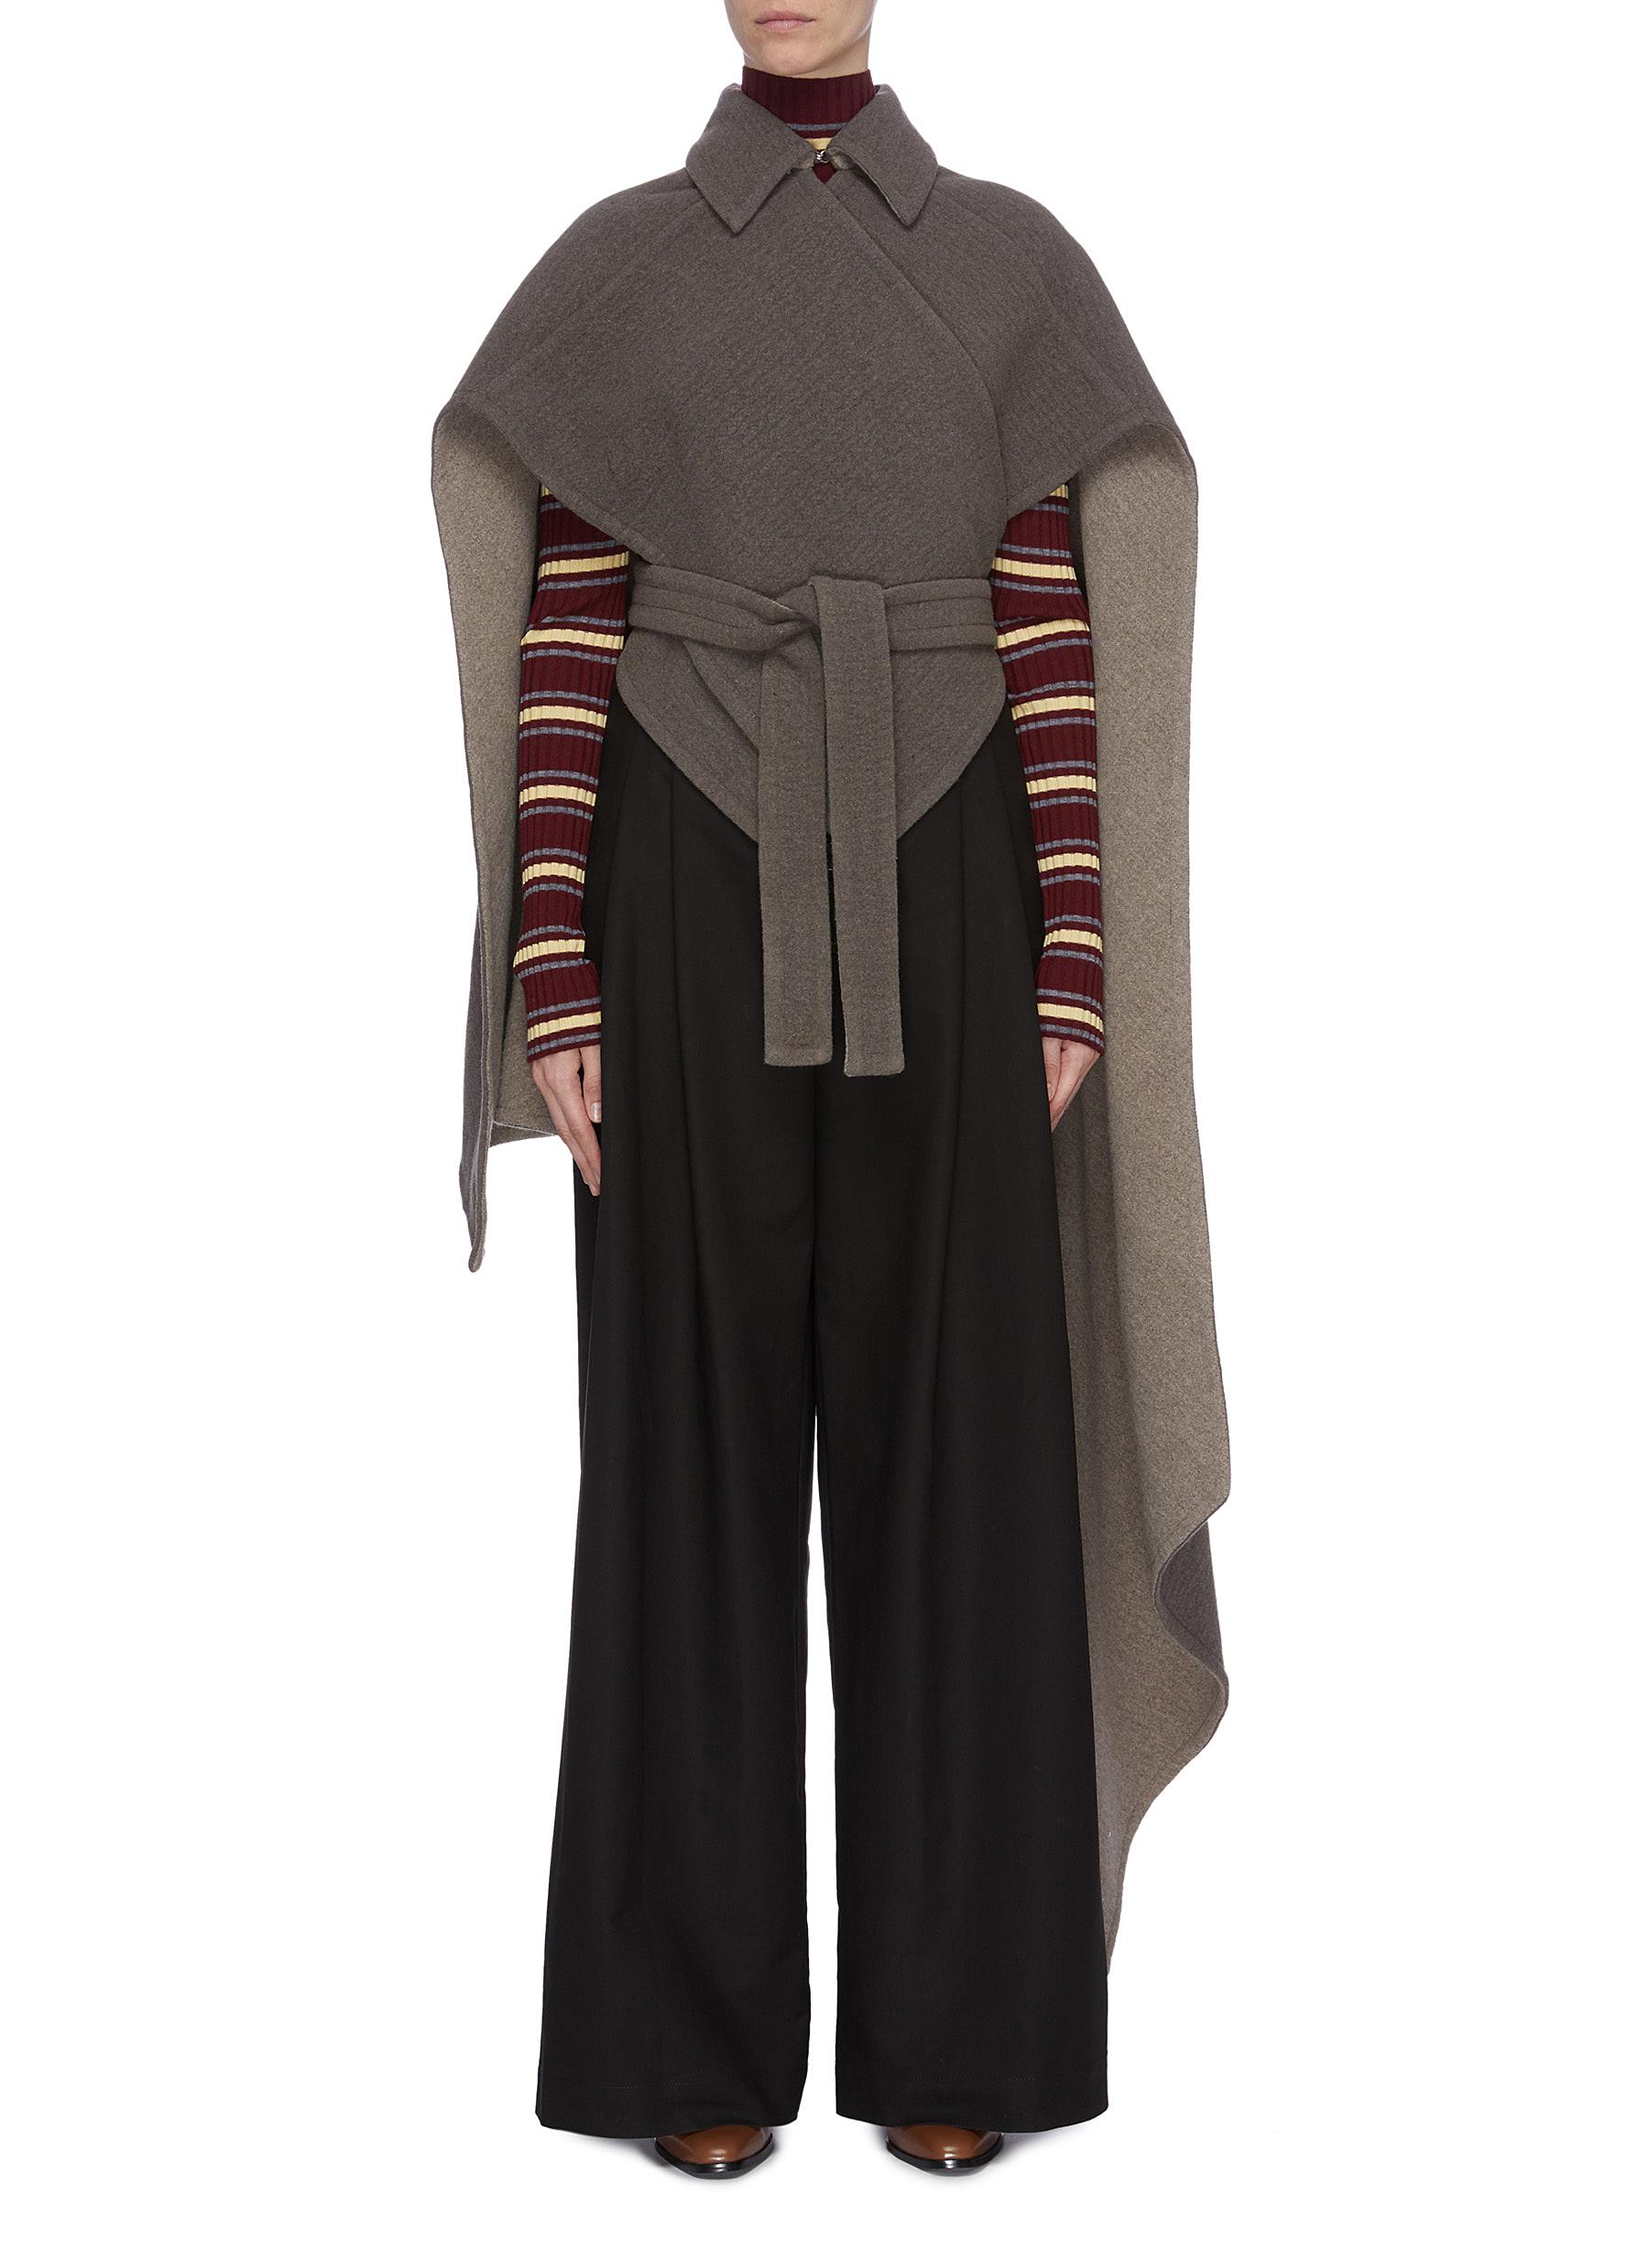 Cross wrap belted cape by Jw Anderson